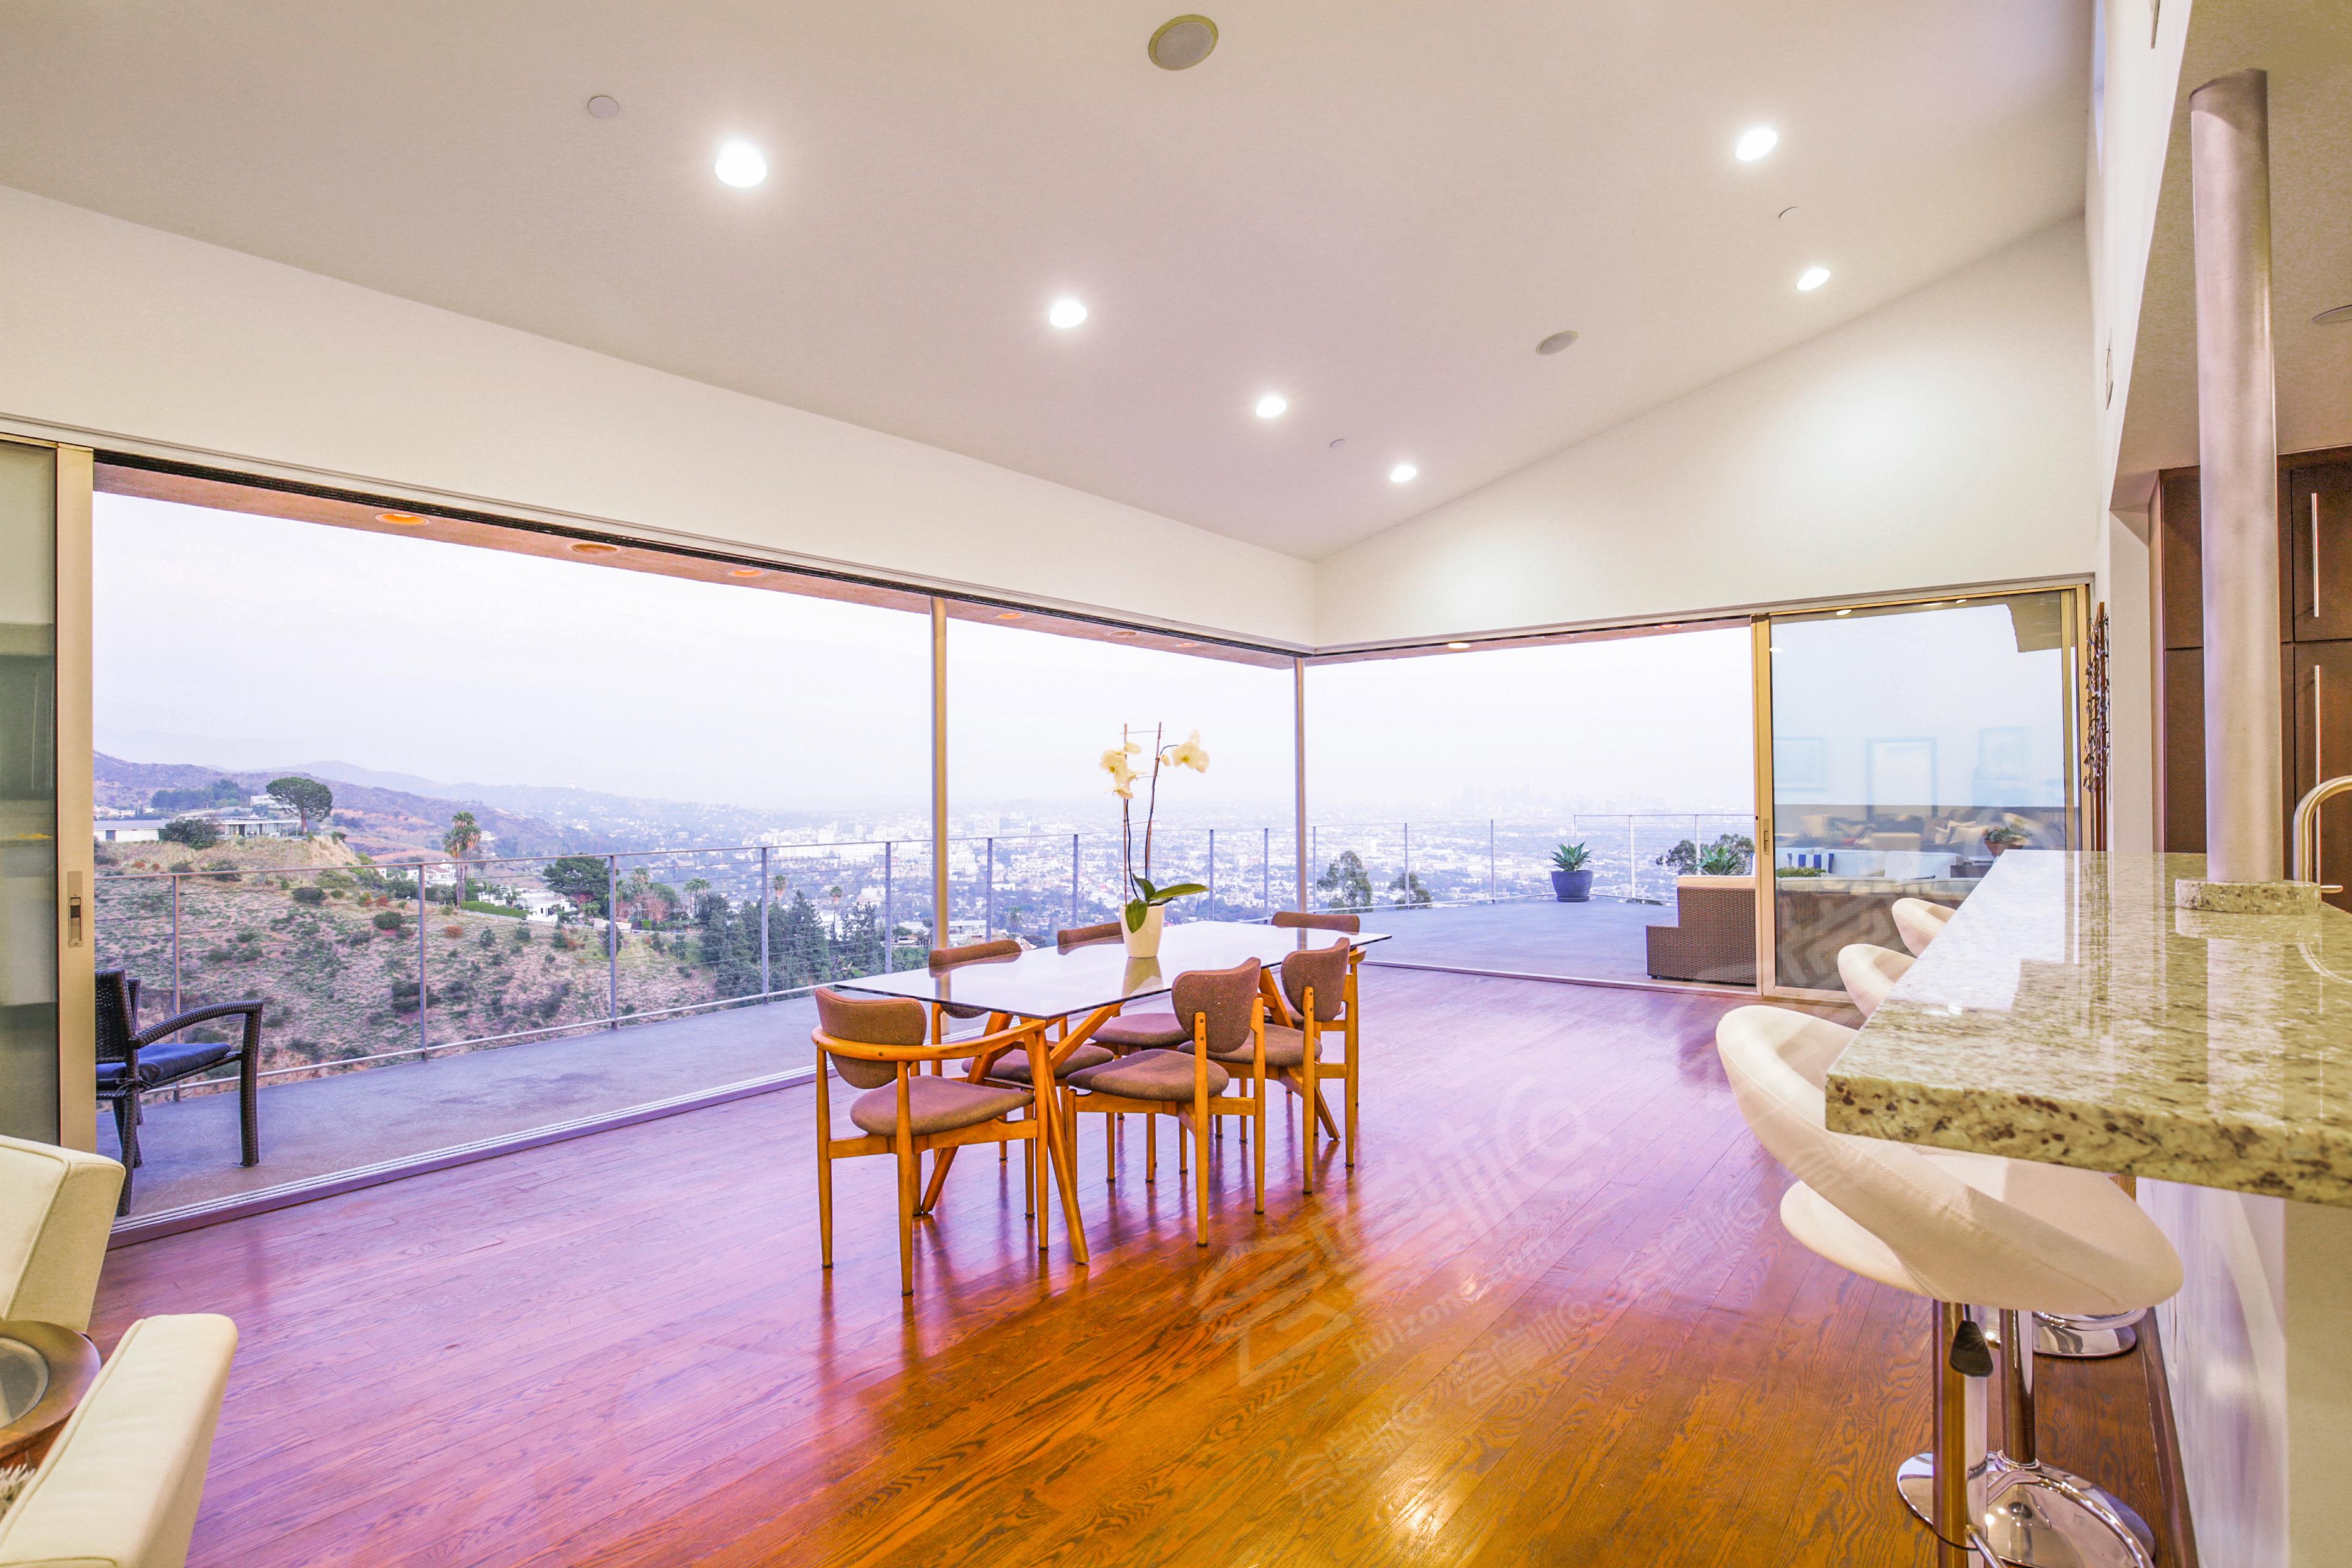 West Hollywood hills home with jetliner views of downtown, Griffith Park and the ocean